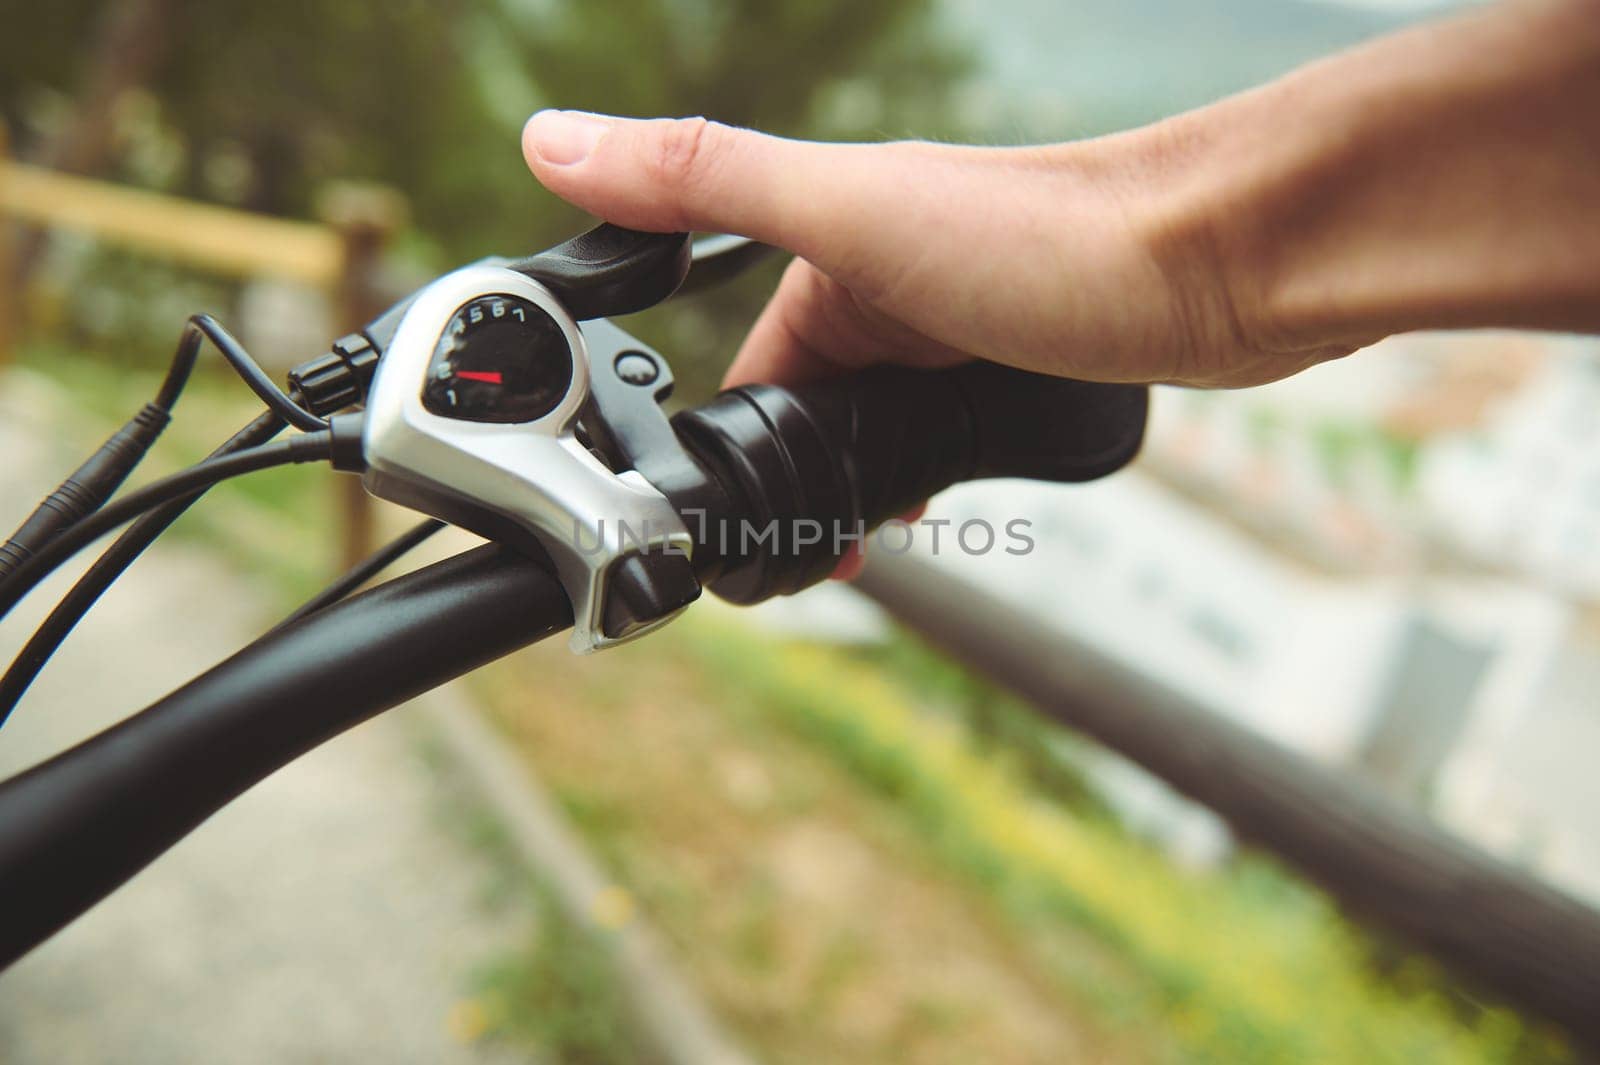 Close-up hand of a man adjusting the bicycle brakes while cycling in the mountains. Man in electric bike, gently squeezing hand brakes while descending during his ride in the mountains outdoors